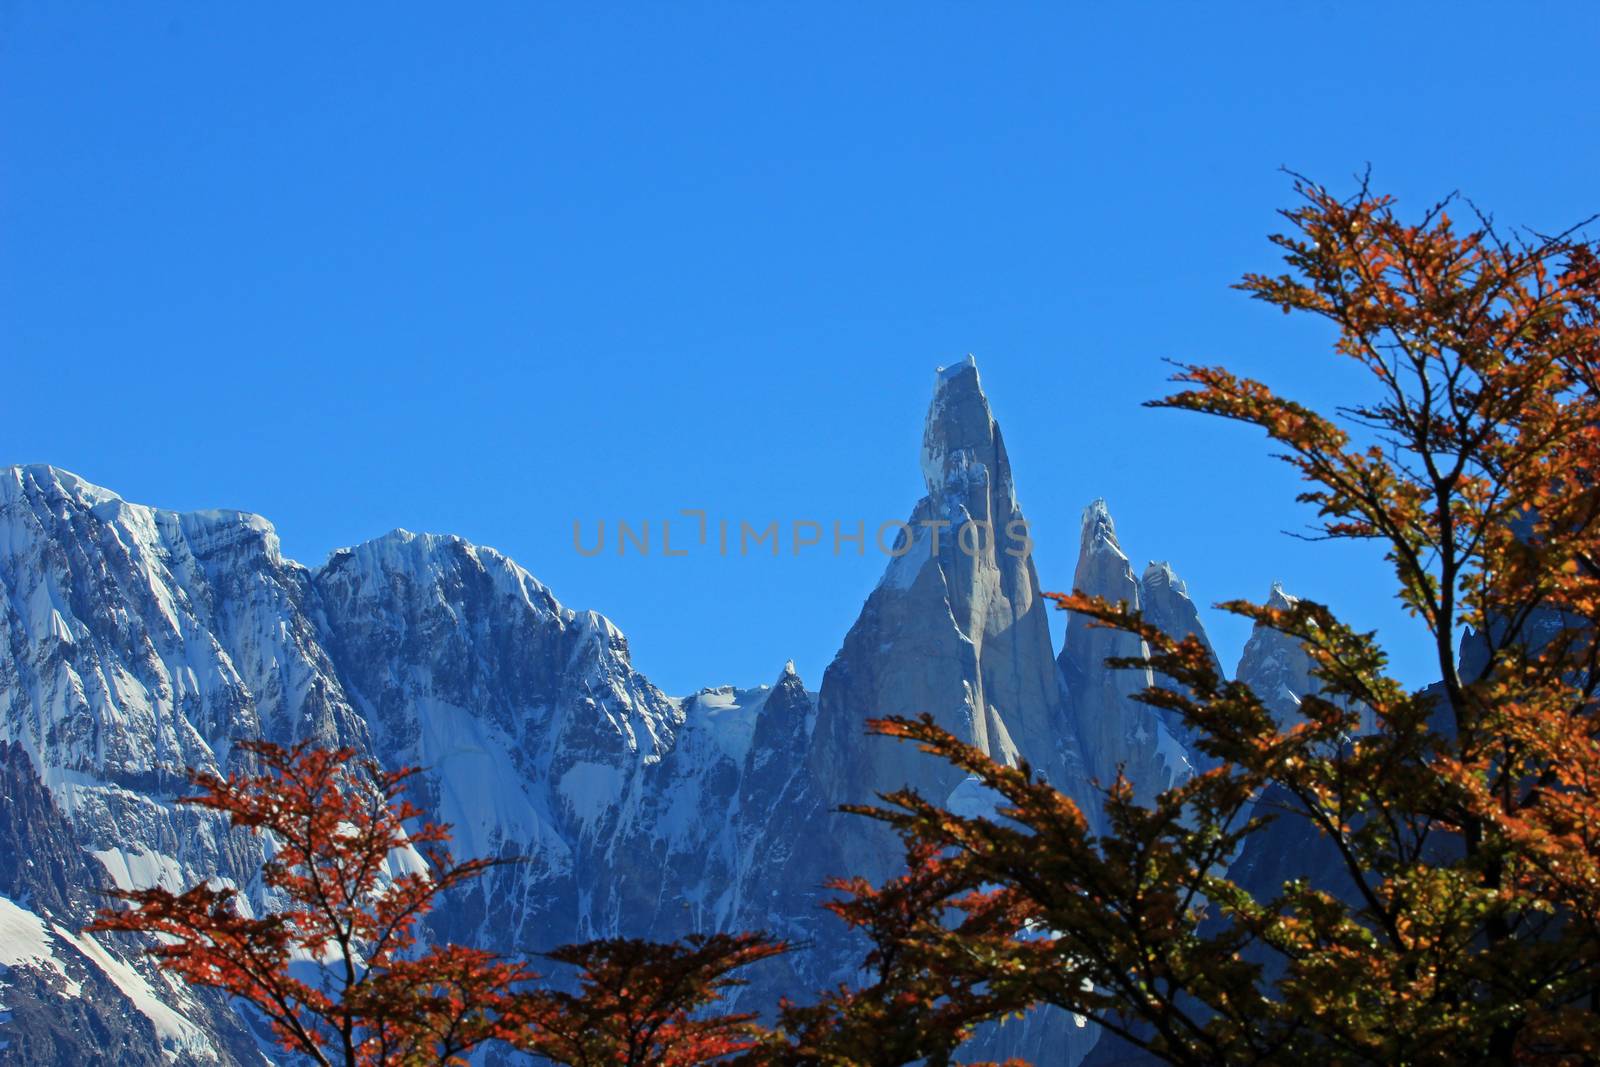 Cerro Torre mountain in autumn colors. Los Glaciares National park, Argentina, background mountain in focus by cicloco